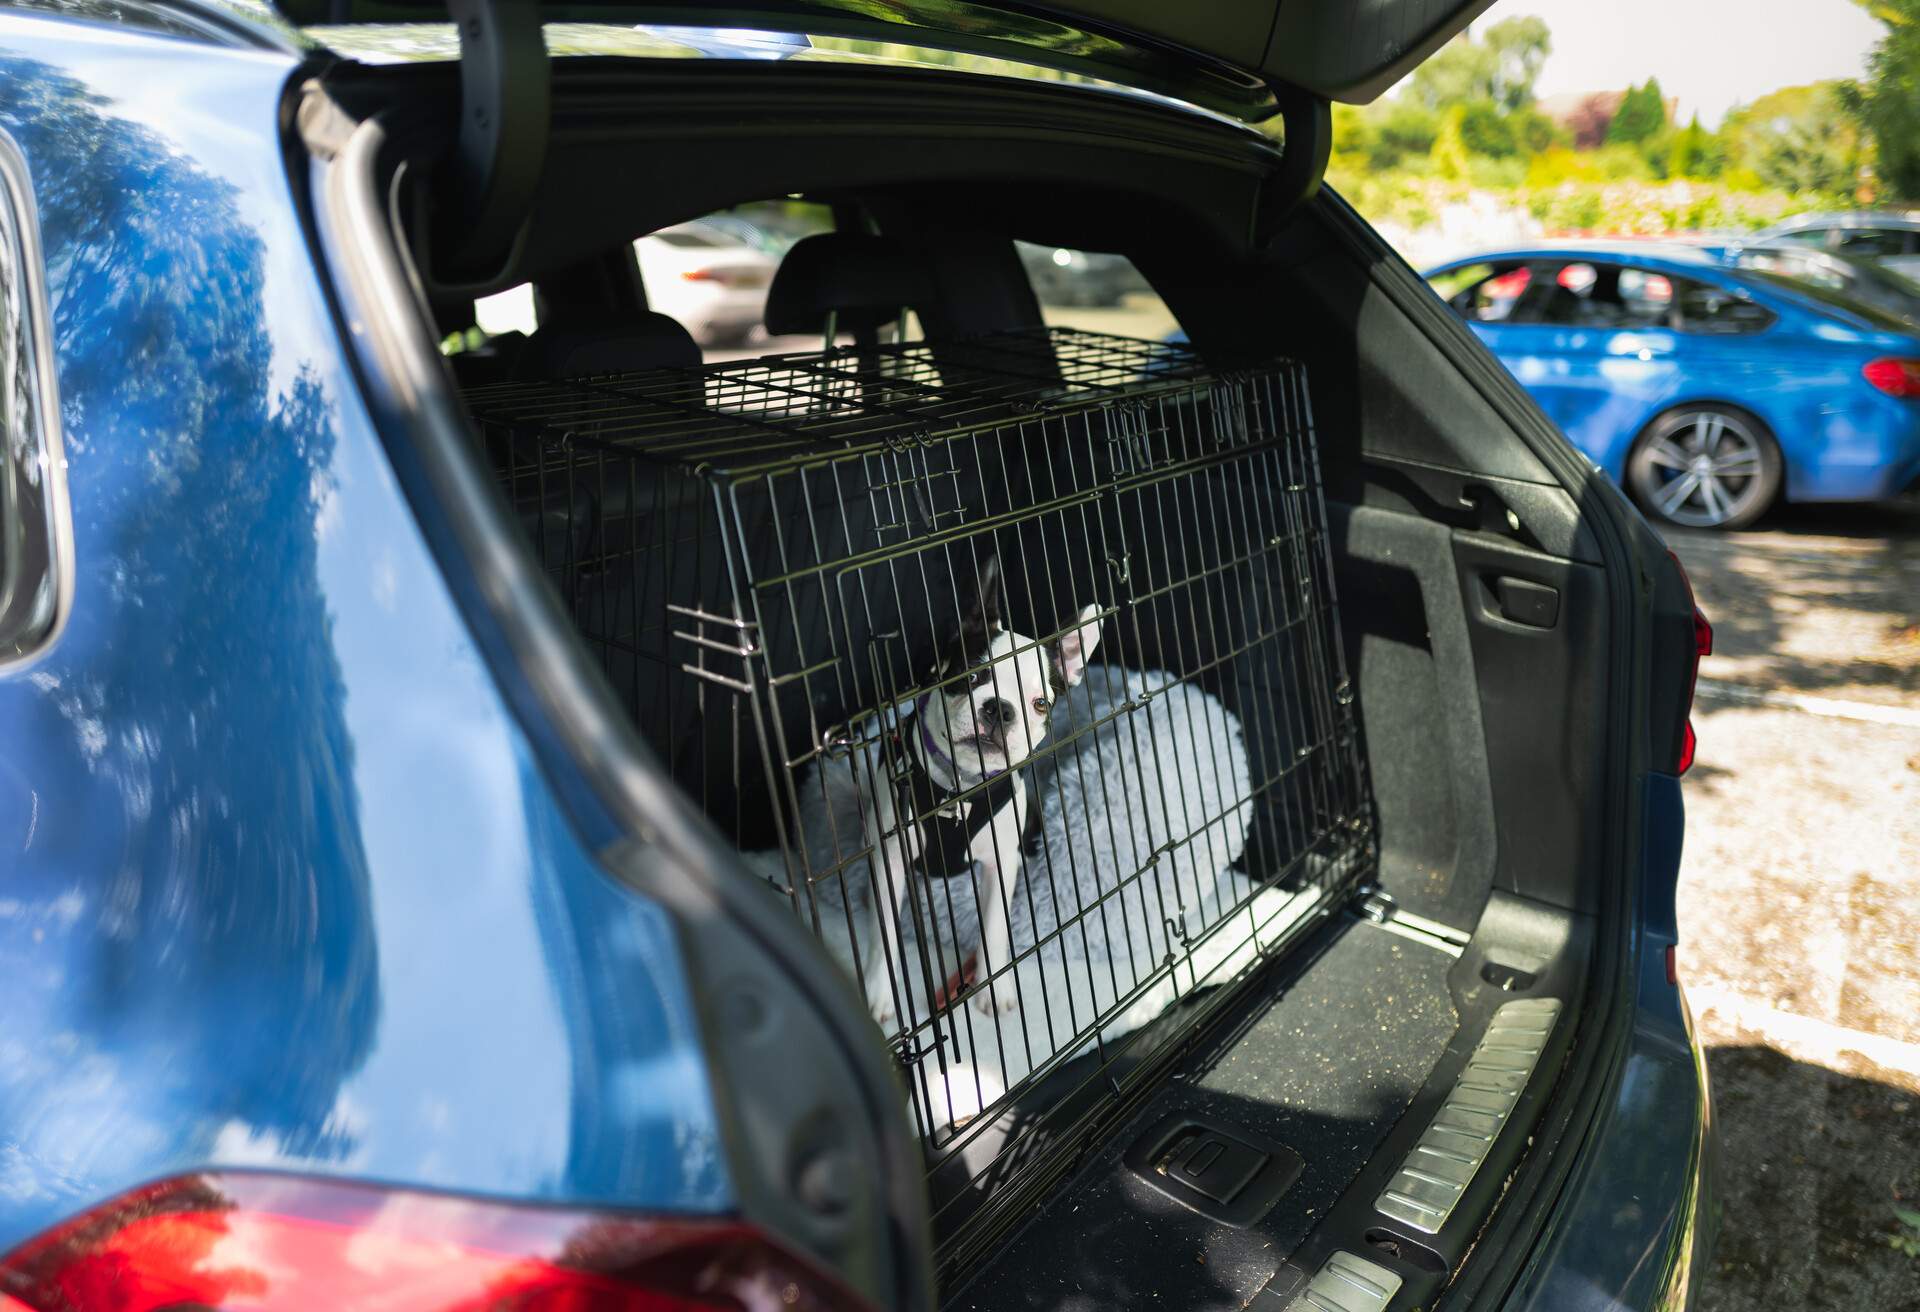 Cute Boston Terrier puppy in a cage in the boot of a car. The car is stationary and the boot door is open